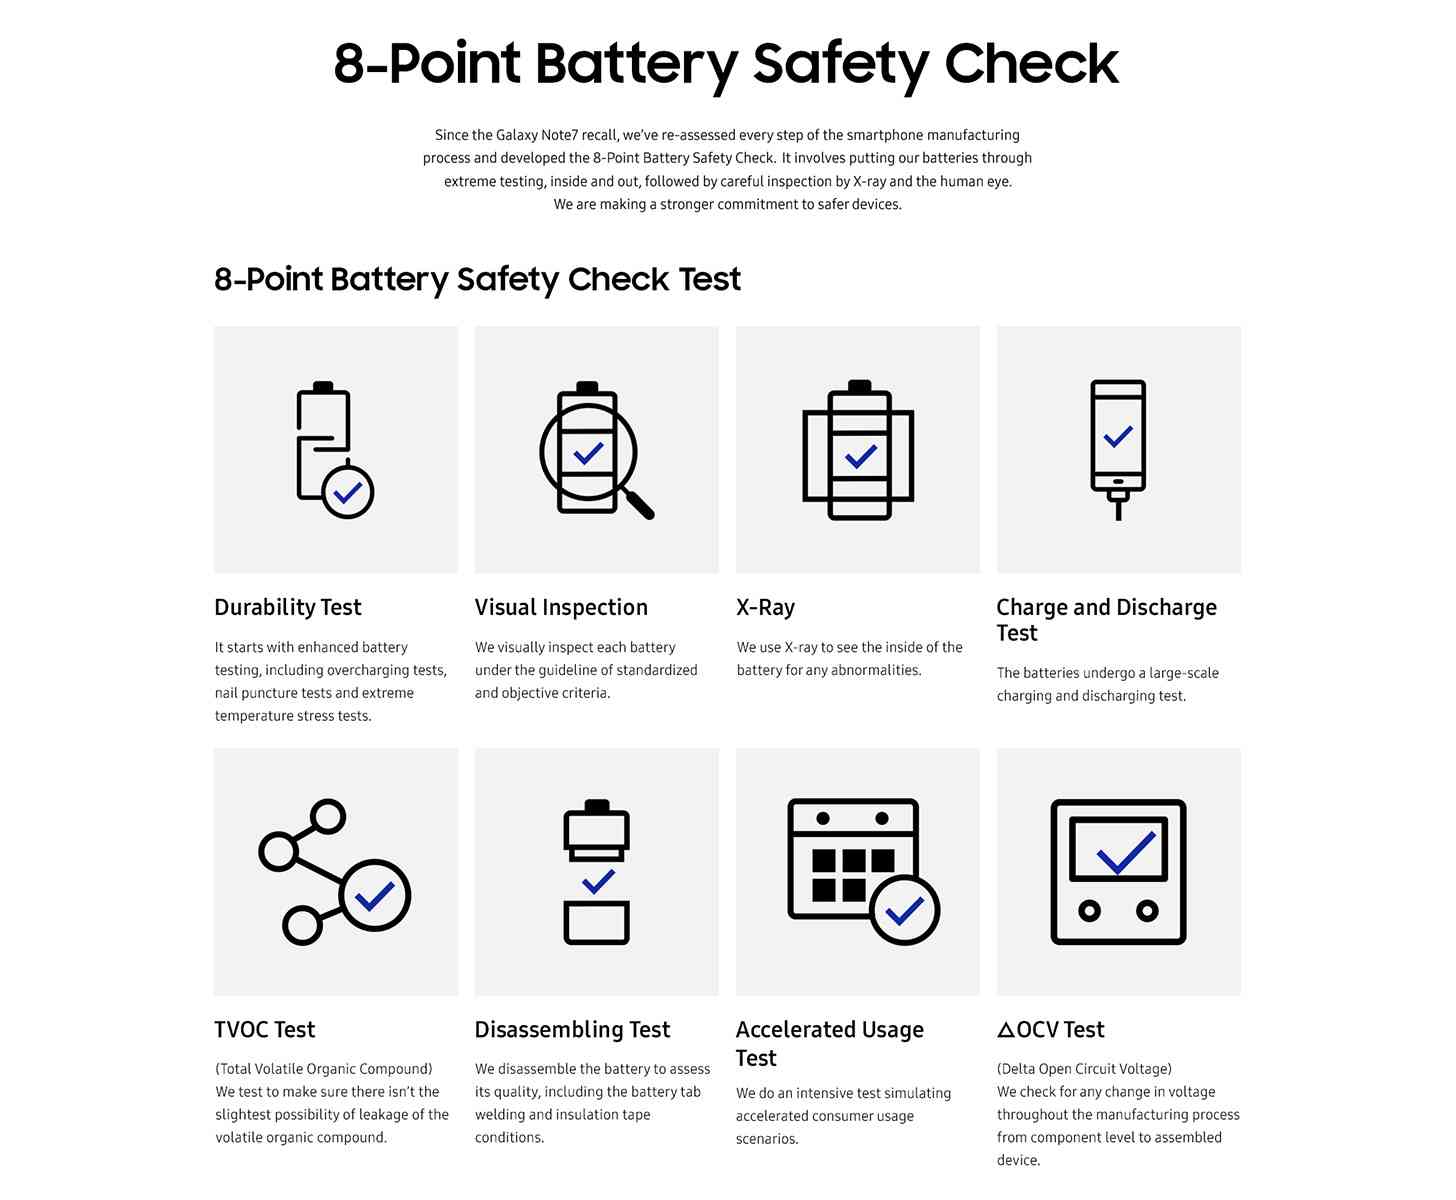 Samsung Galaxy Note 7 8-Point Battery Safety Check